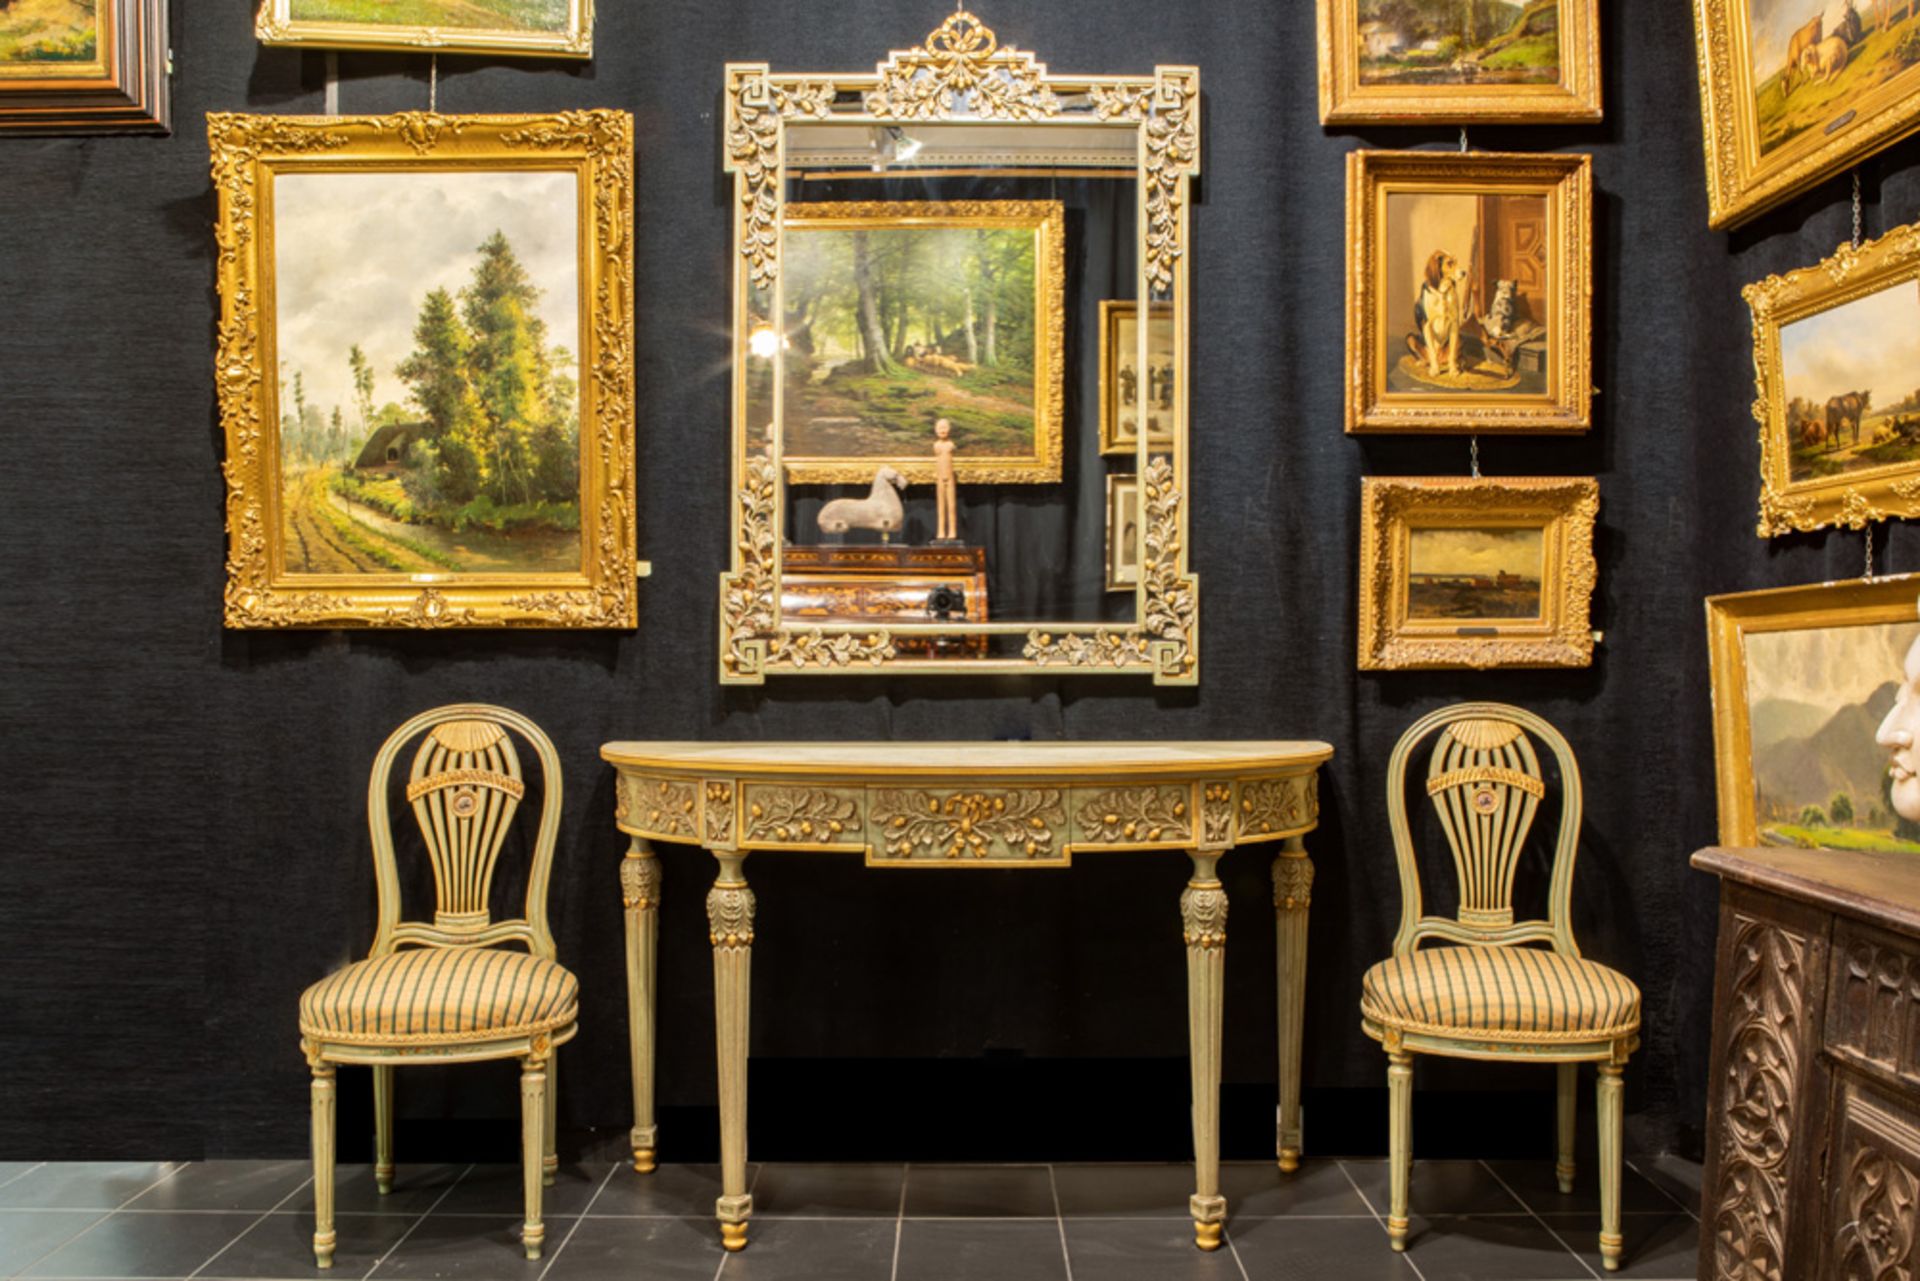 neoclassical set in polychromed wood : a console, mirror and a pair of chairs || Neoclassicistisch